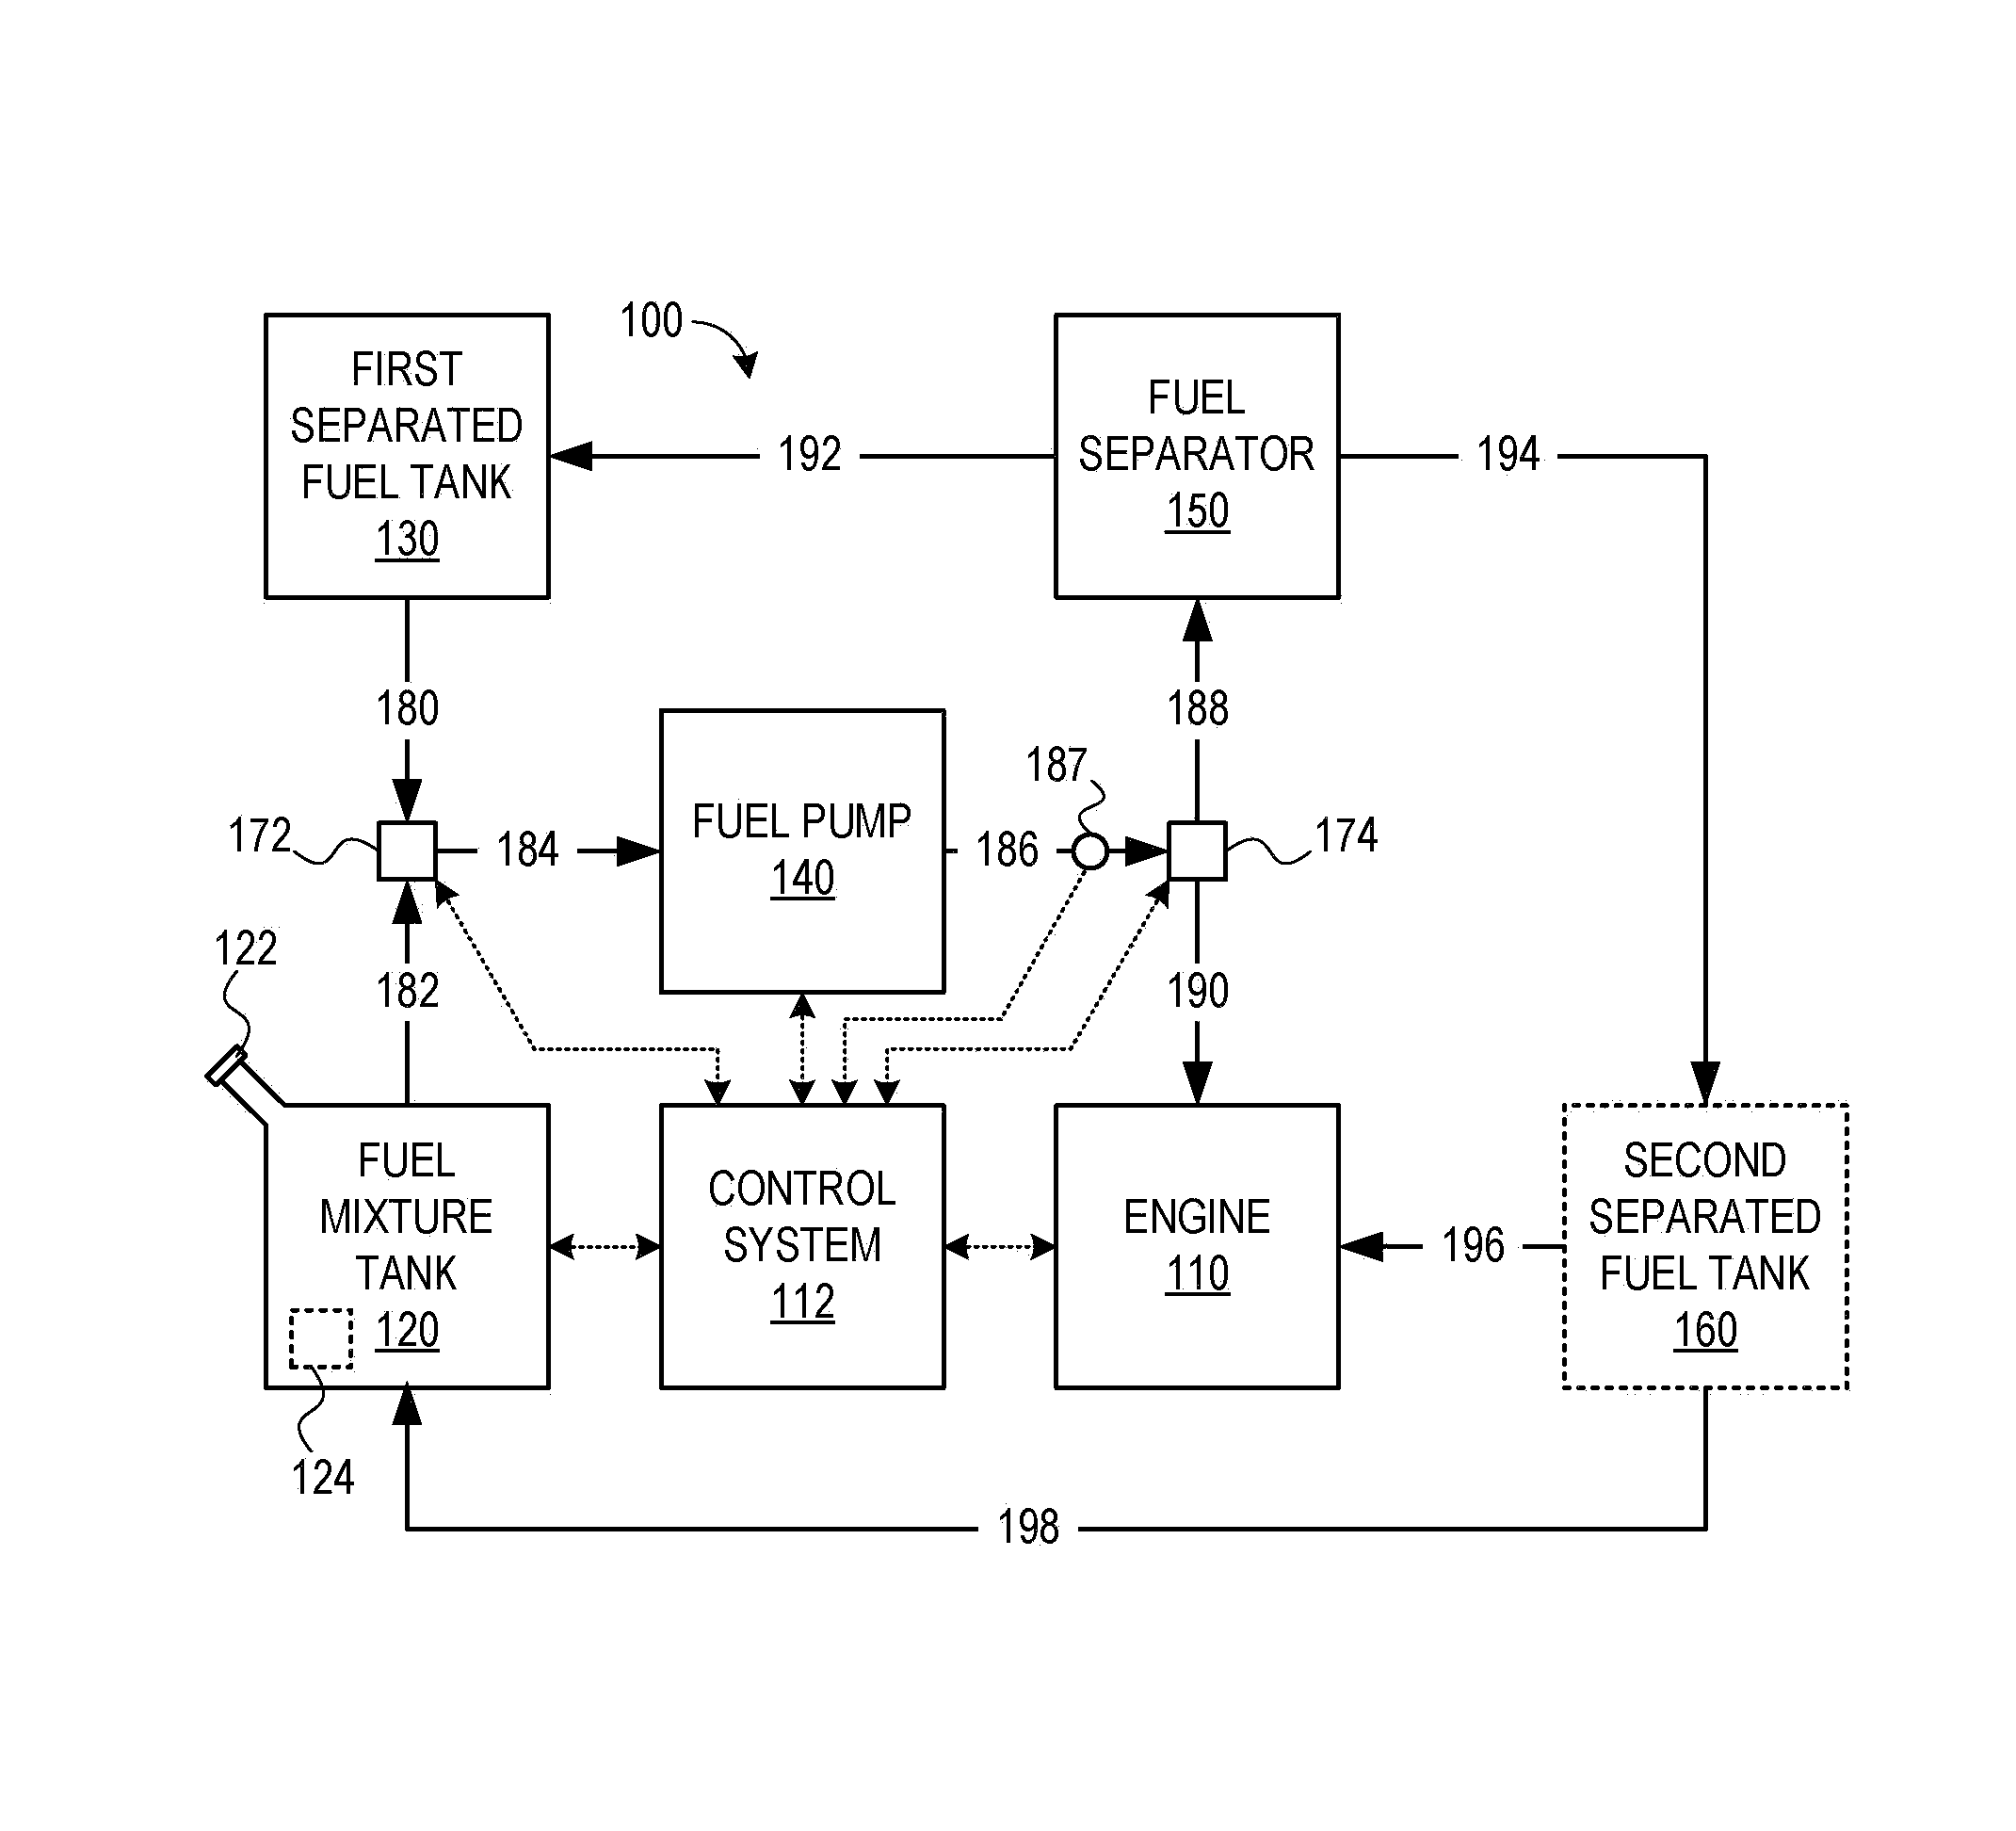 Fuel system for multi-fuel engine